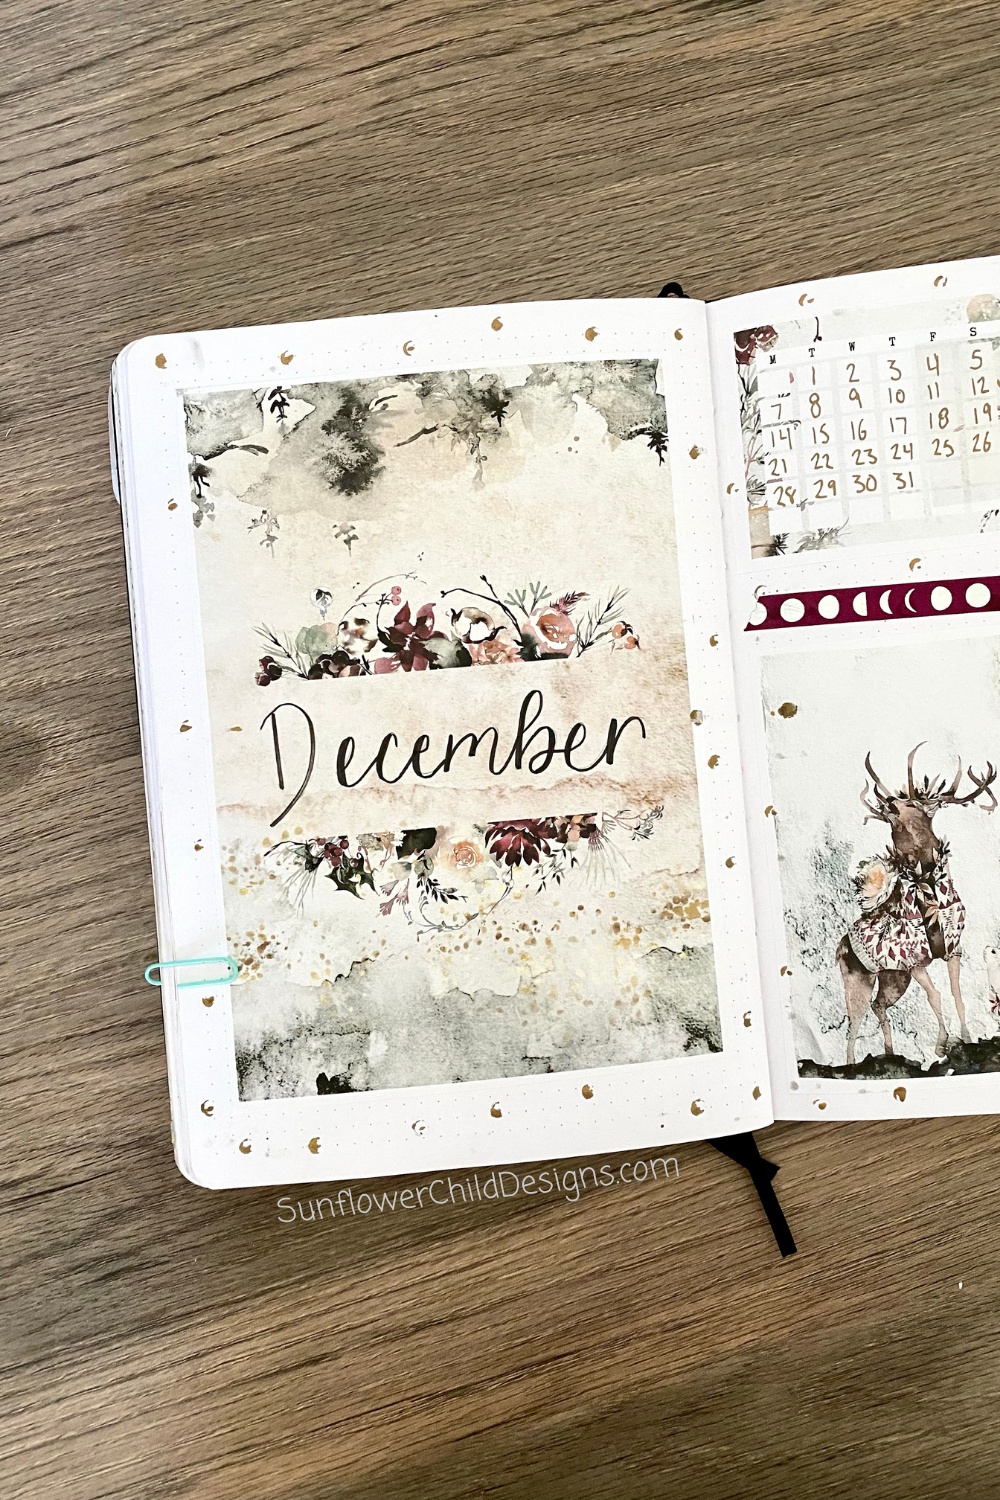 https://images.squarespace-cdn.com/content/v1/5e20e07a4be93e7c47a328f2/1654293687606-WLD3QJBSPDKRTI13YLYT/december-bullet-journal-ideas-using-printable-stickers-1.png